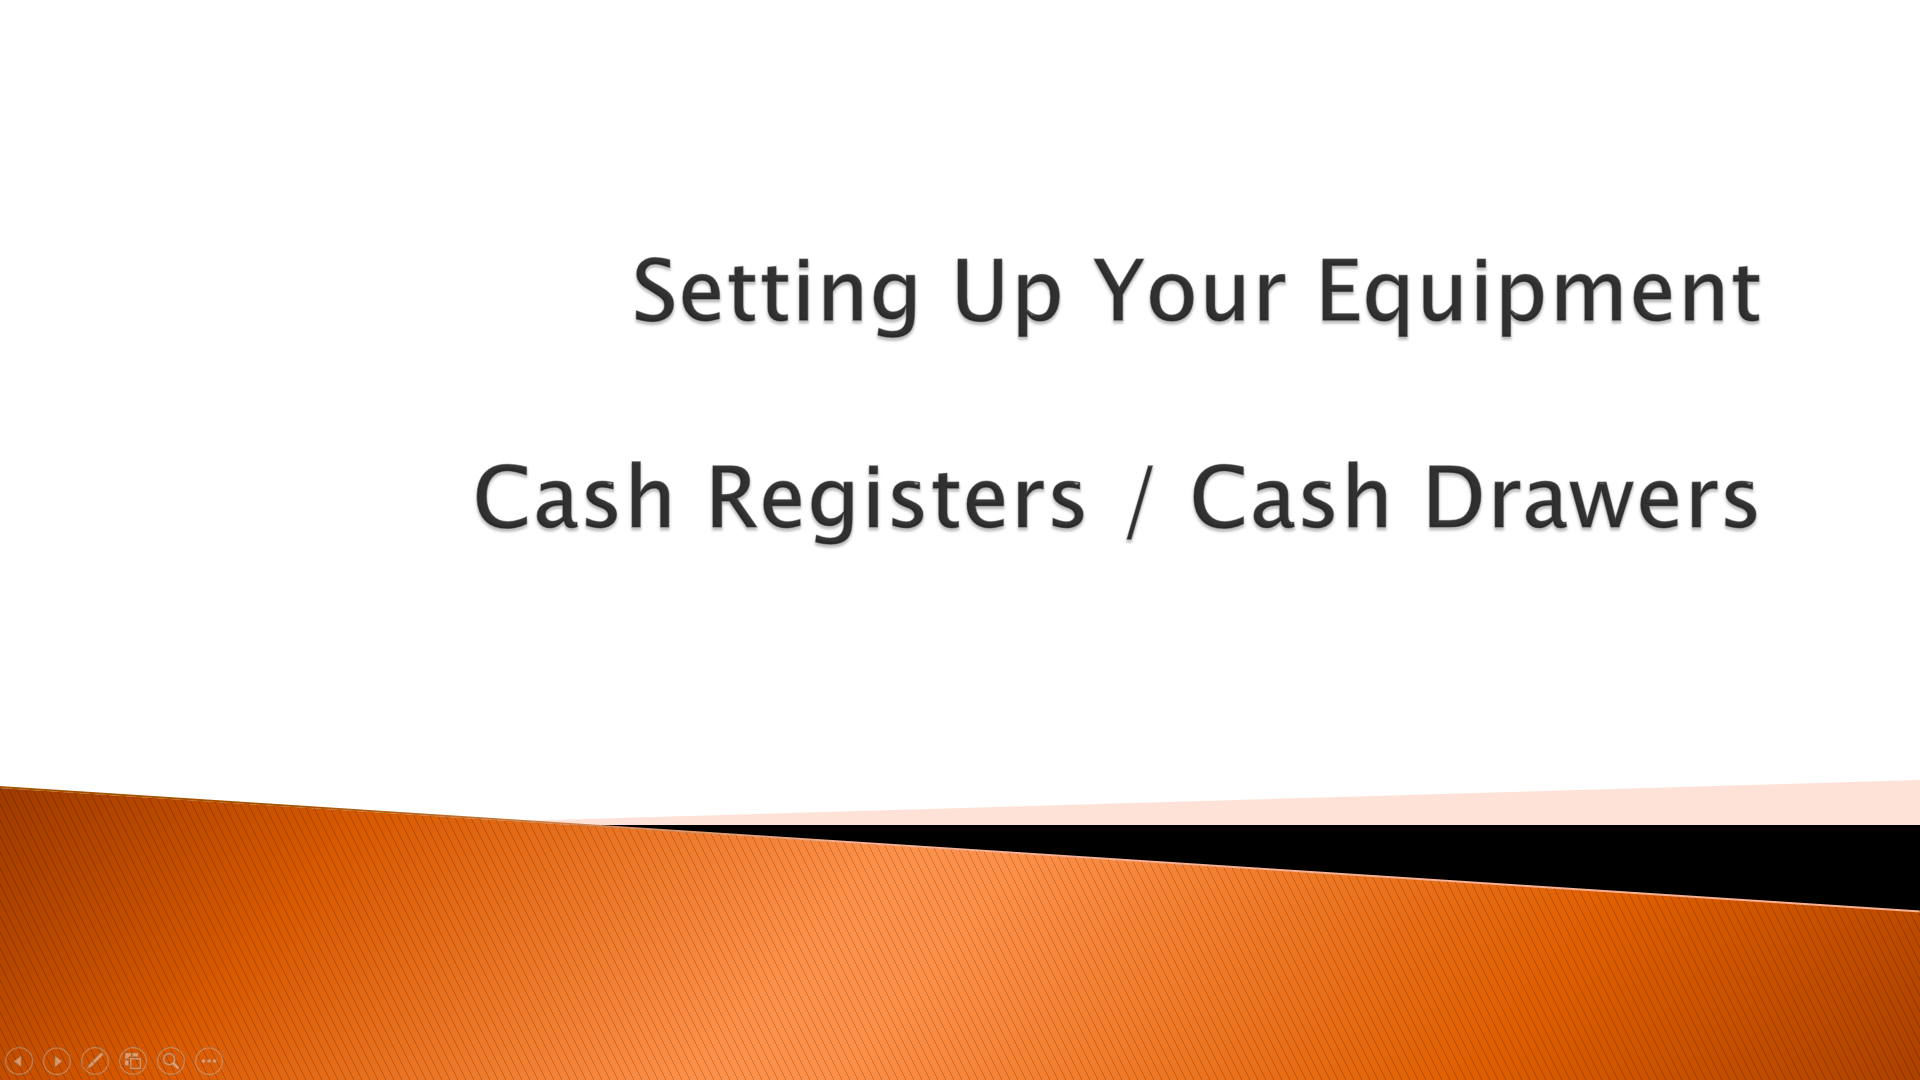 Setting Up Your Equipment - Cash Registers / Cash Drawers